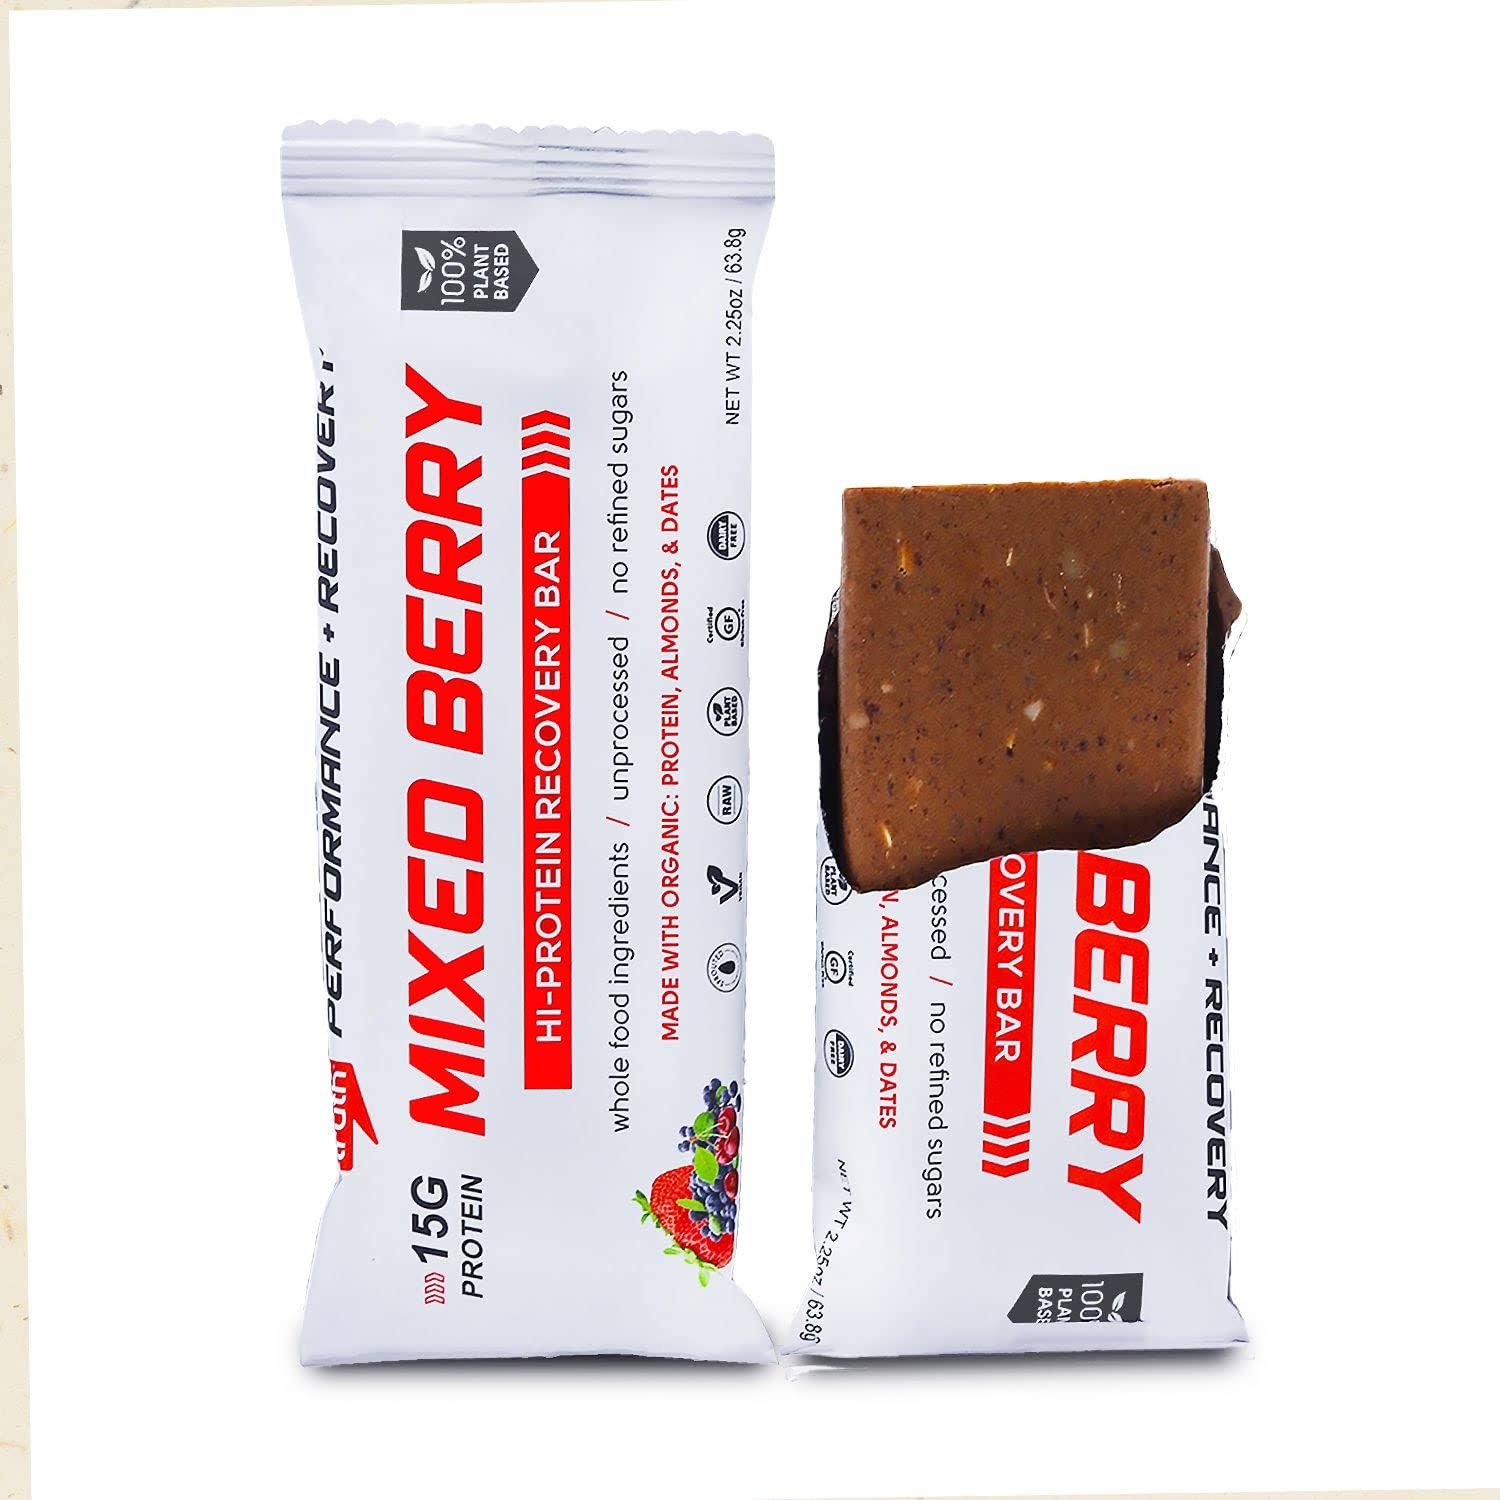 Organic Sprouted Mixed Berry Plant-Based Protein Bars - 15g of Pea & Sacha Inchi Protein (12 Pack)